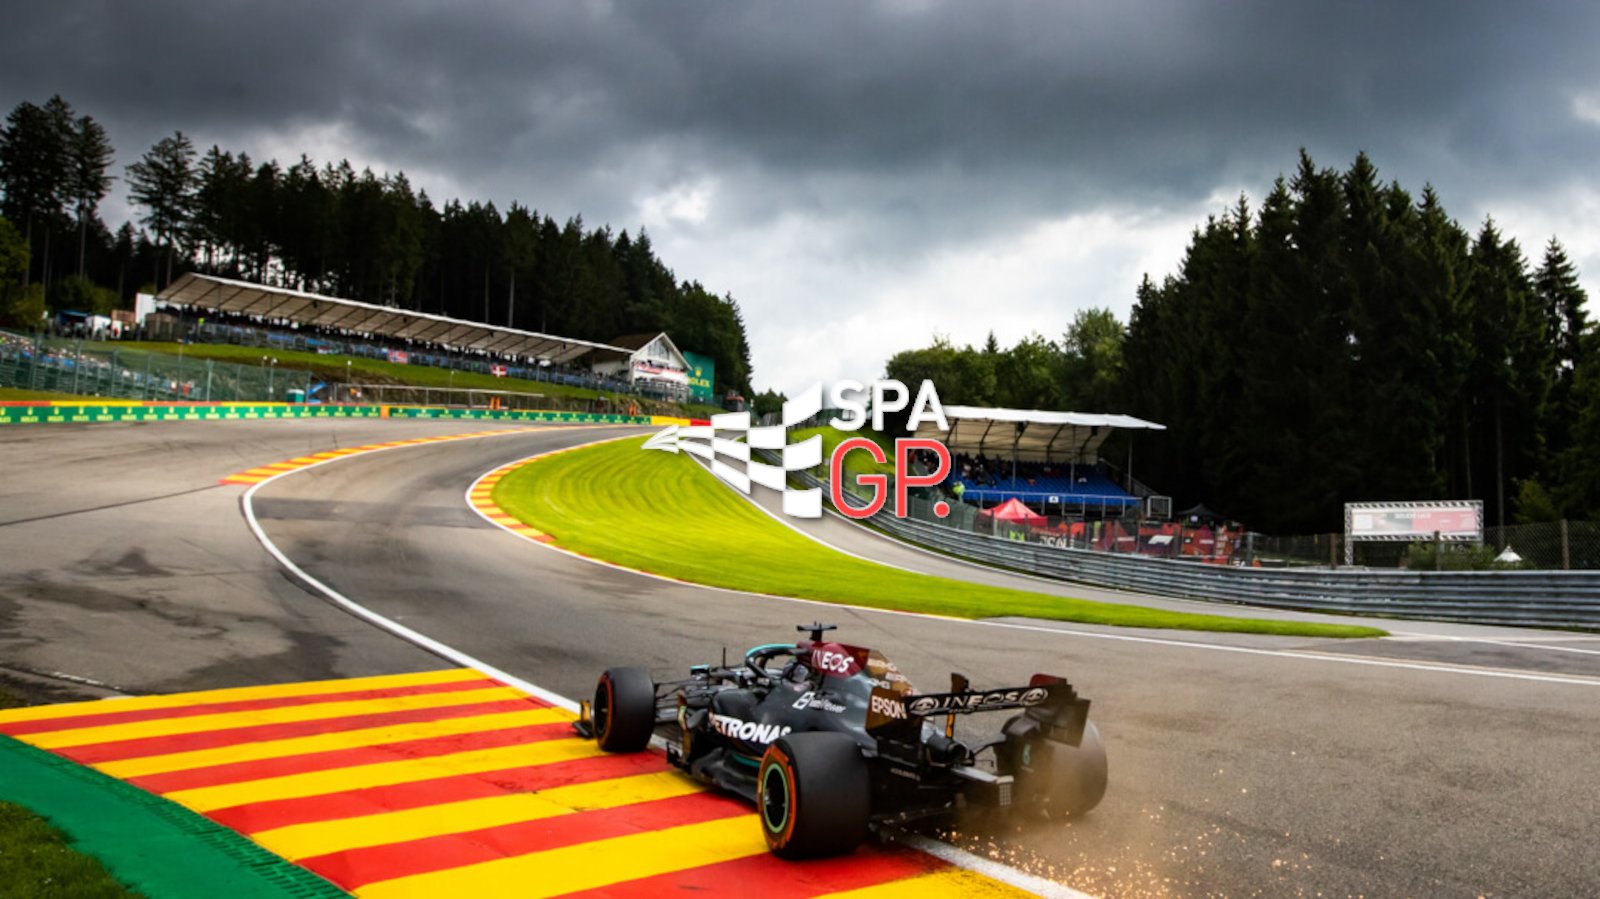 Spa Grand Prix email account hacked to phish banking info from fans